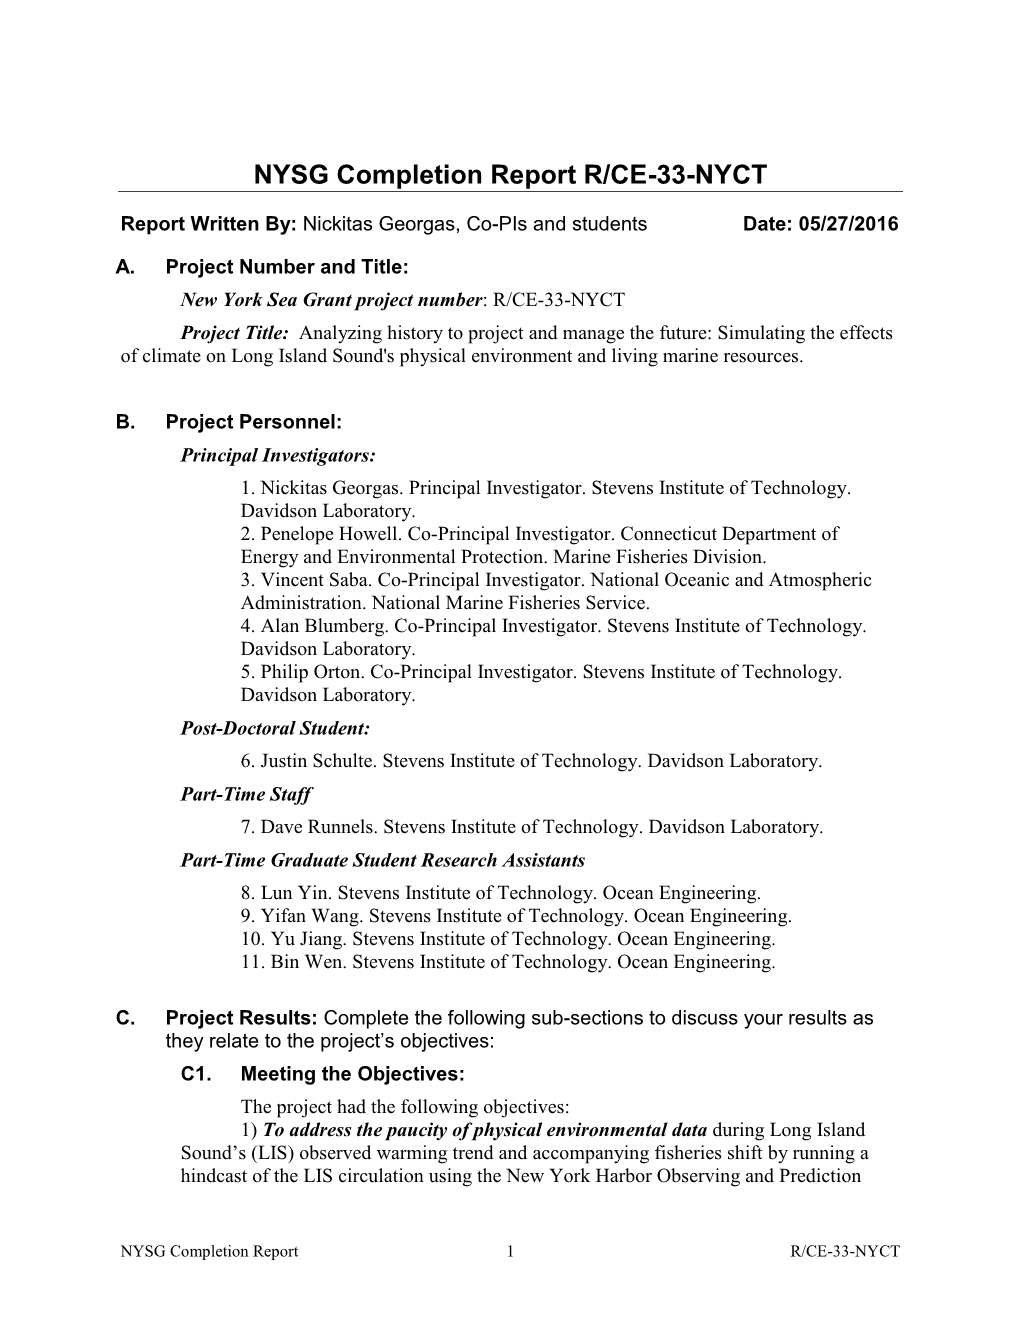 NYSG Completion Report R/CE-33-NYCT